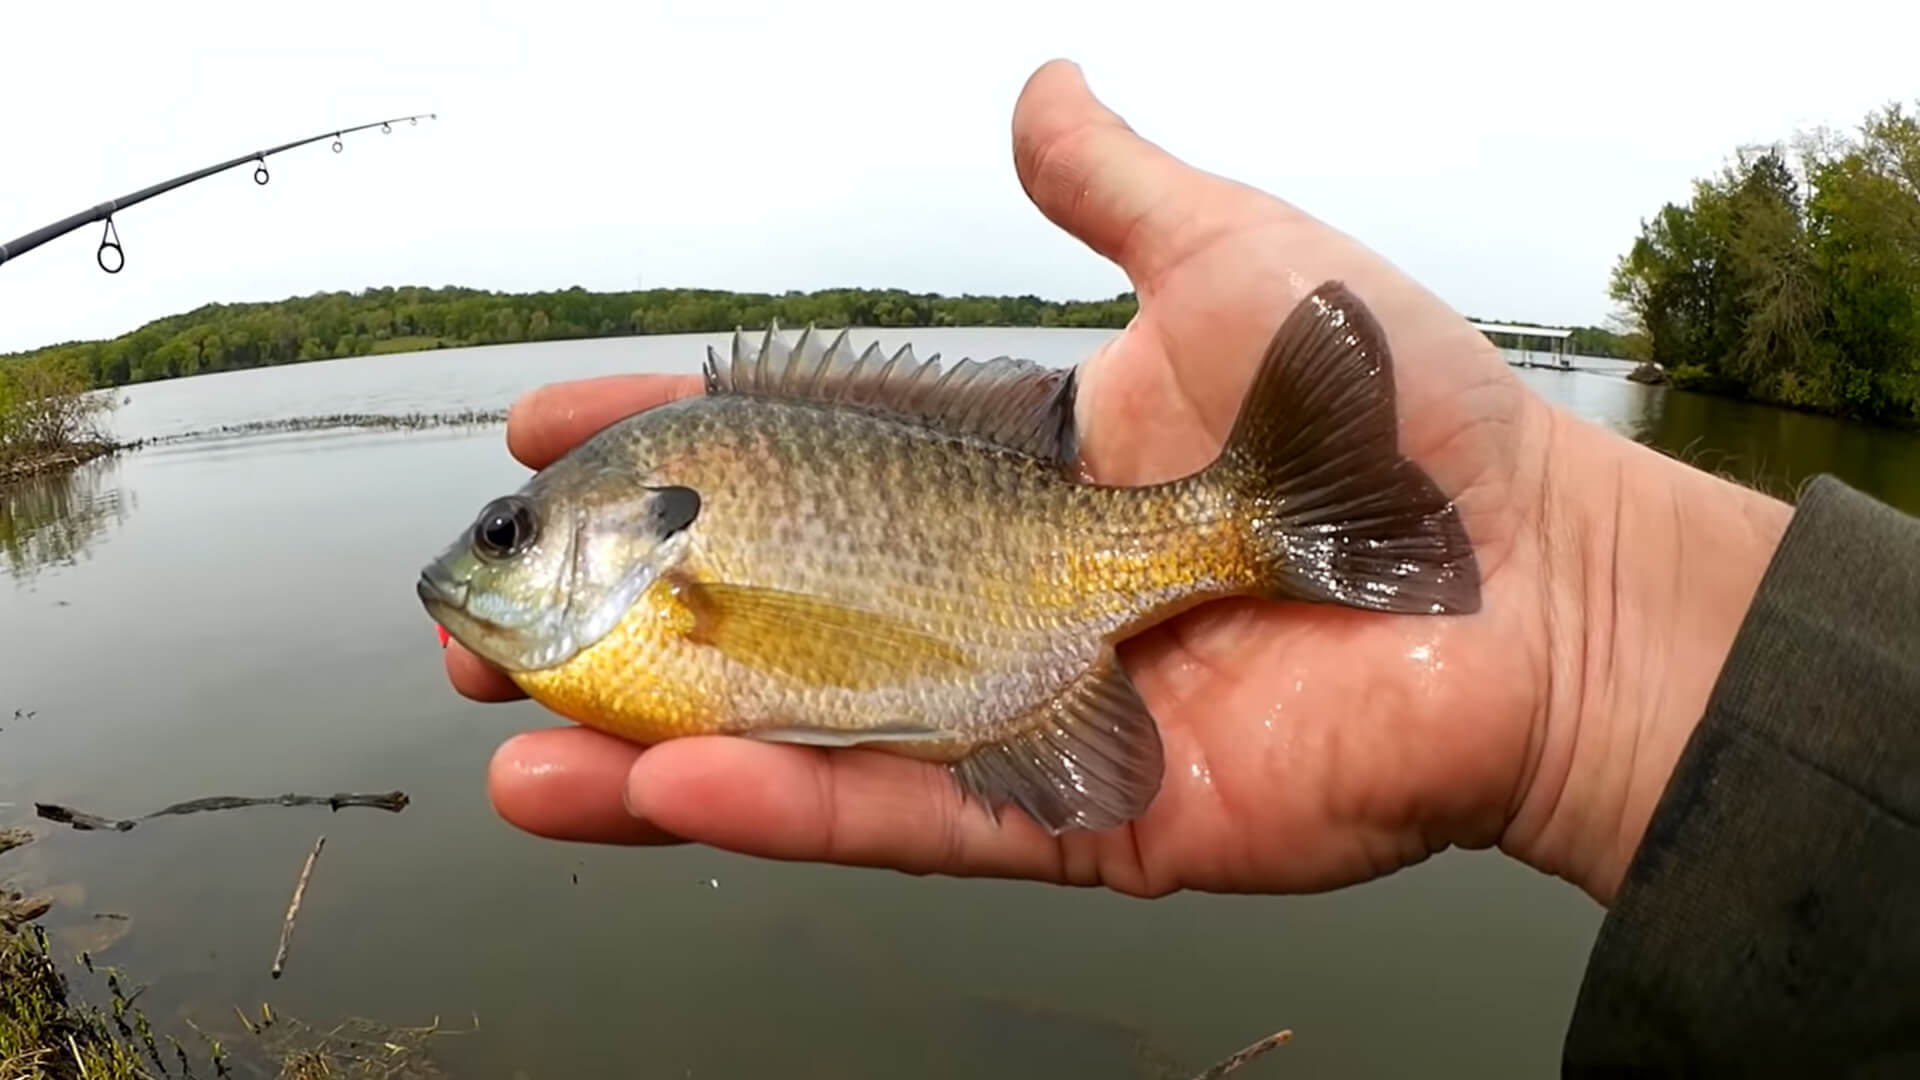 Theres NOTHING WRONG With Fishing for BLUEGILL No Shame in Panfishing - Realistic Fishing